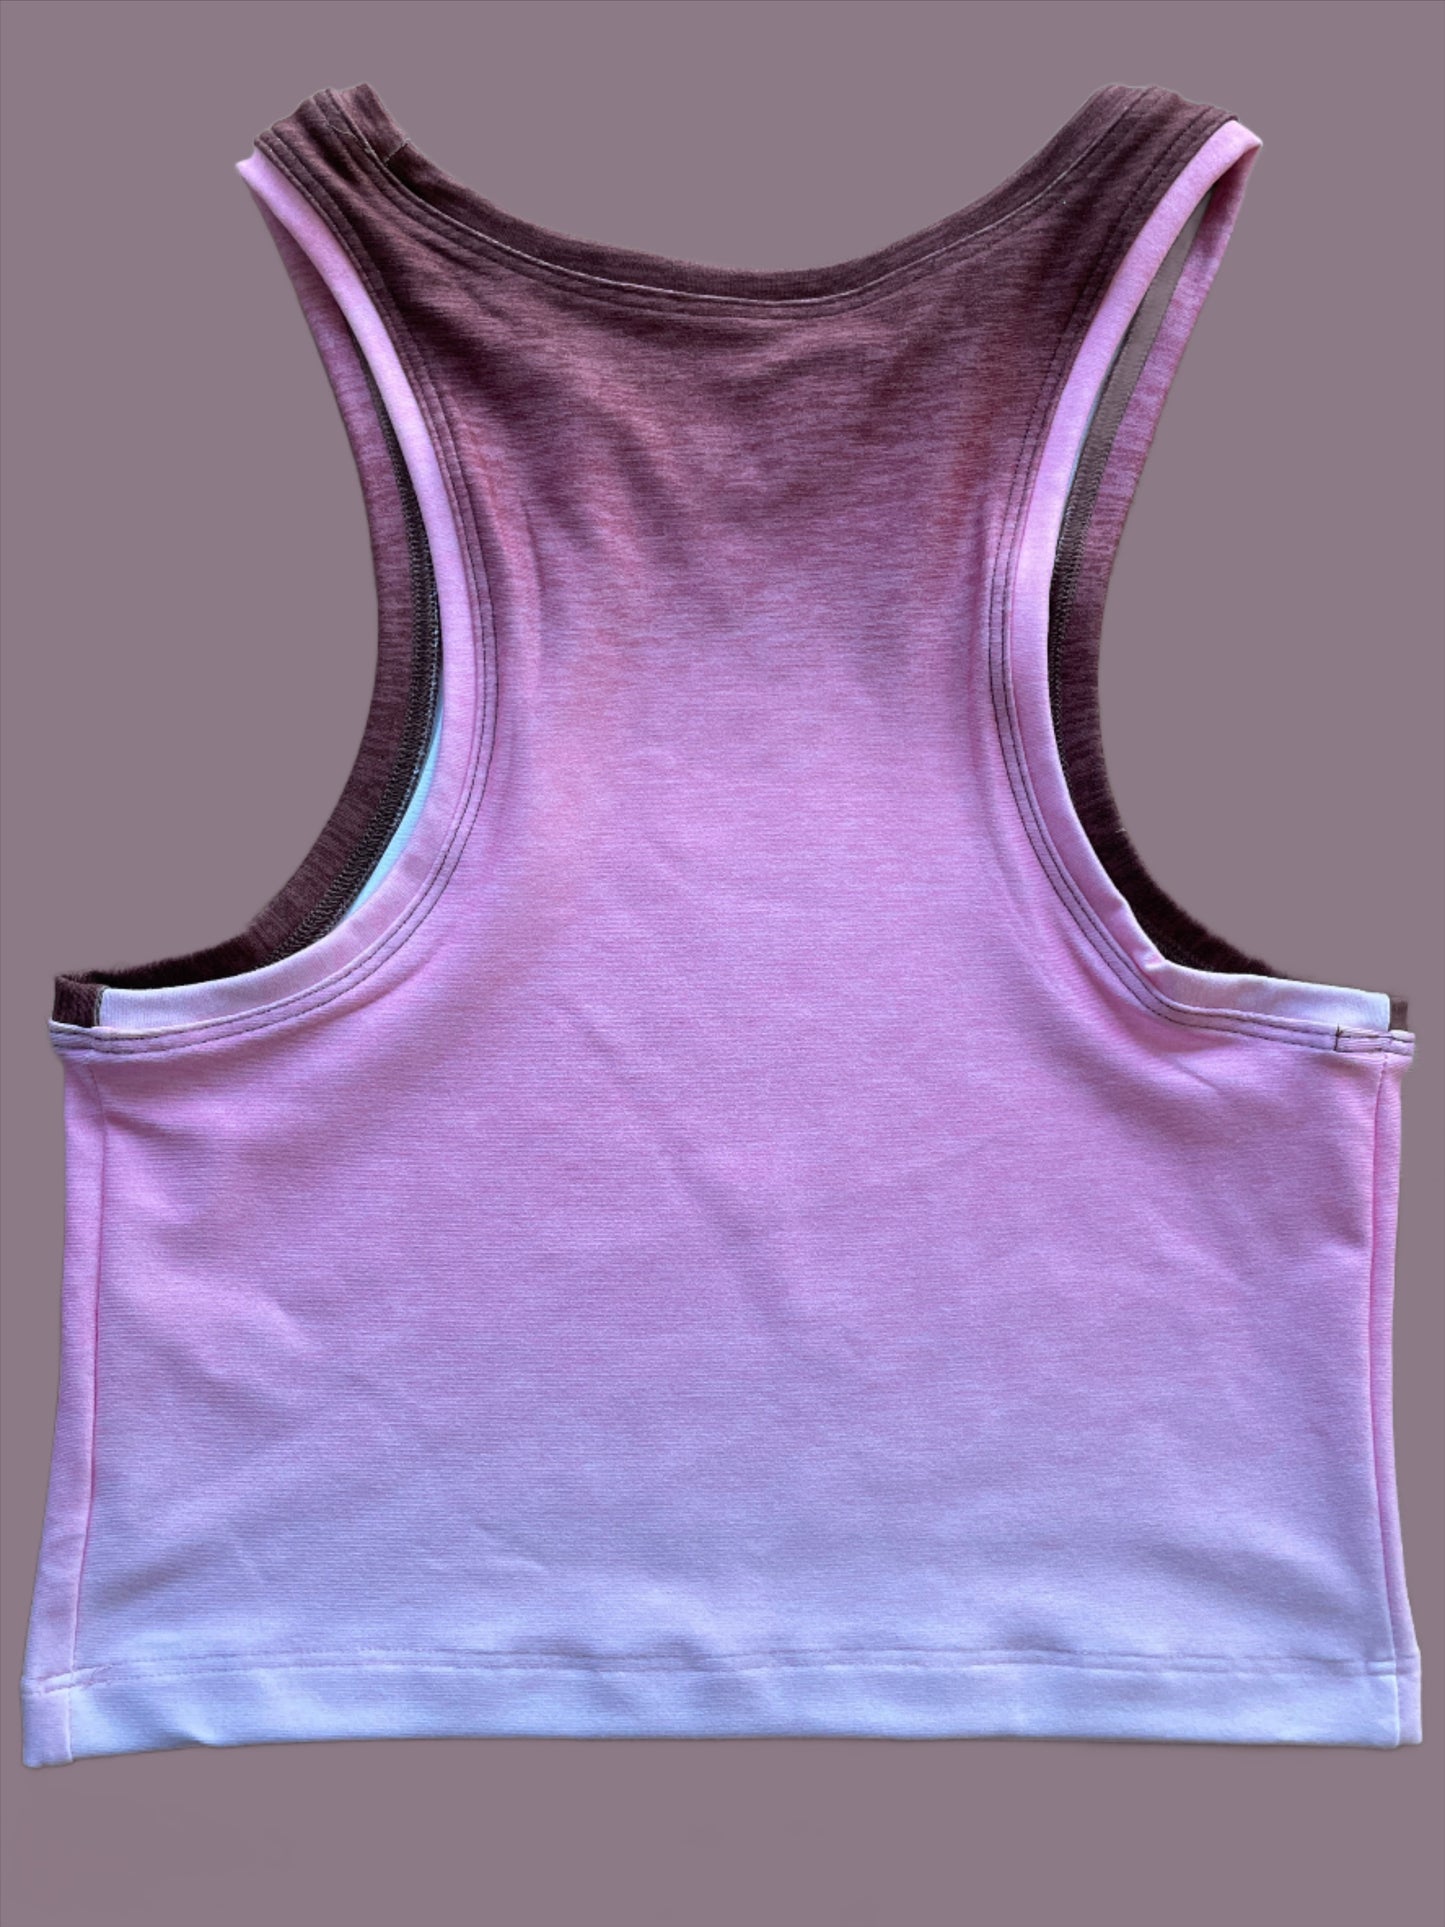 PINK NUDE OMBRE BOX TANK SMALL CROP